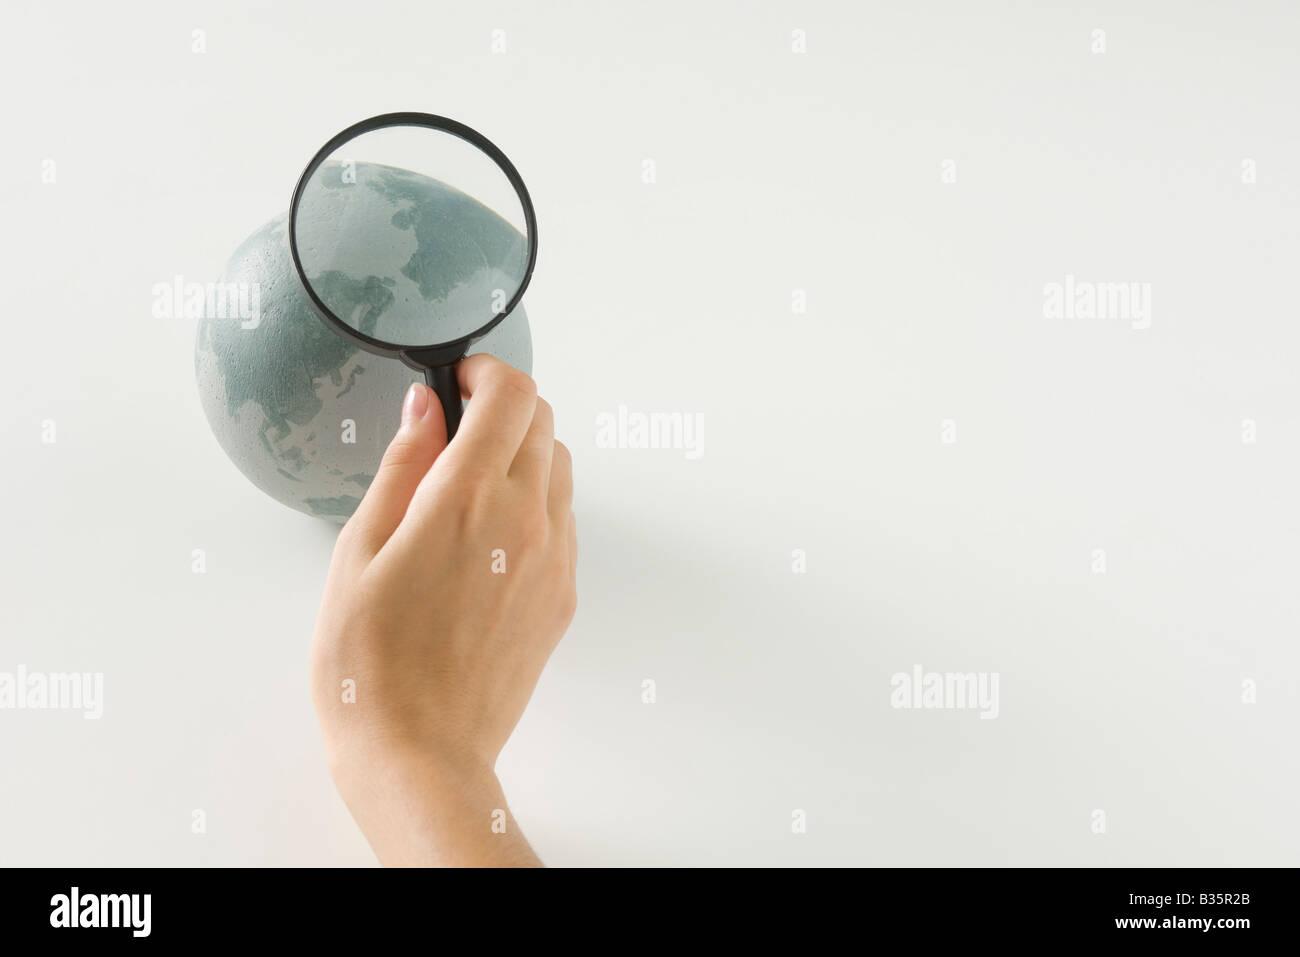 Hand holding magnifying glass over globe, cropped view Stock Photo